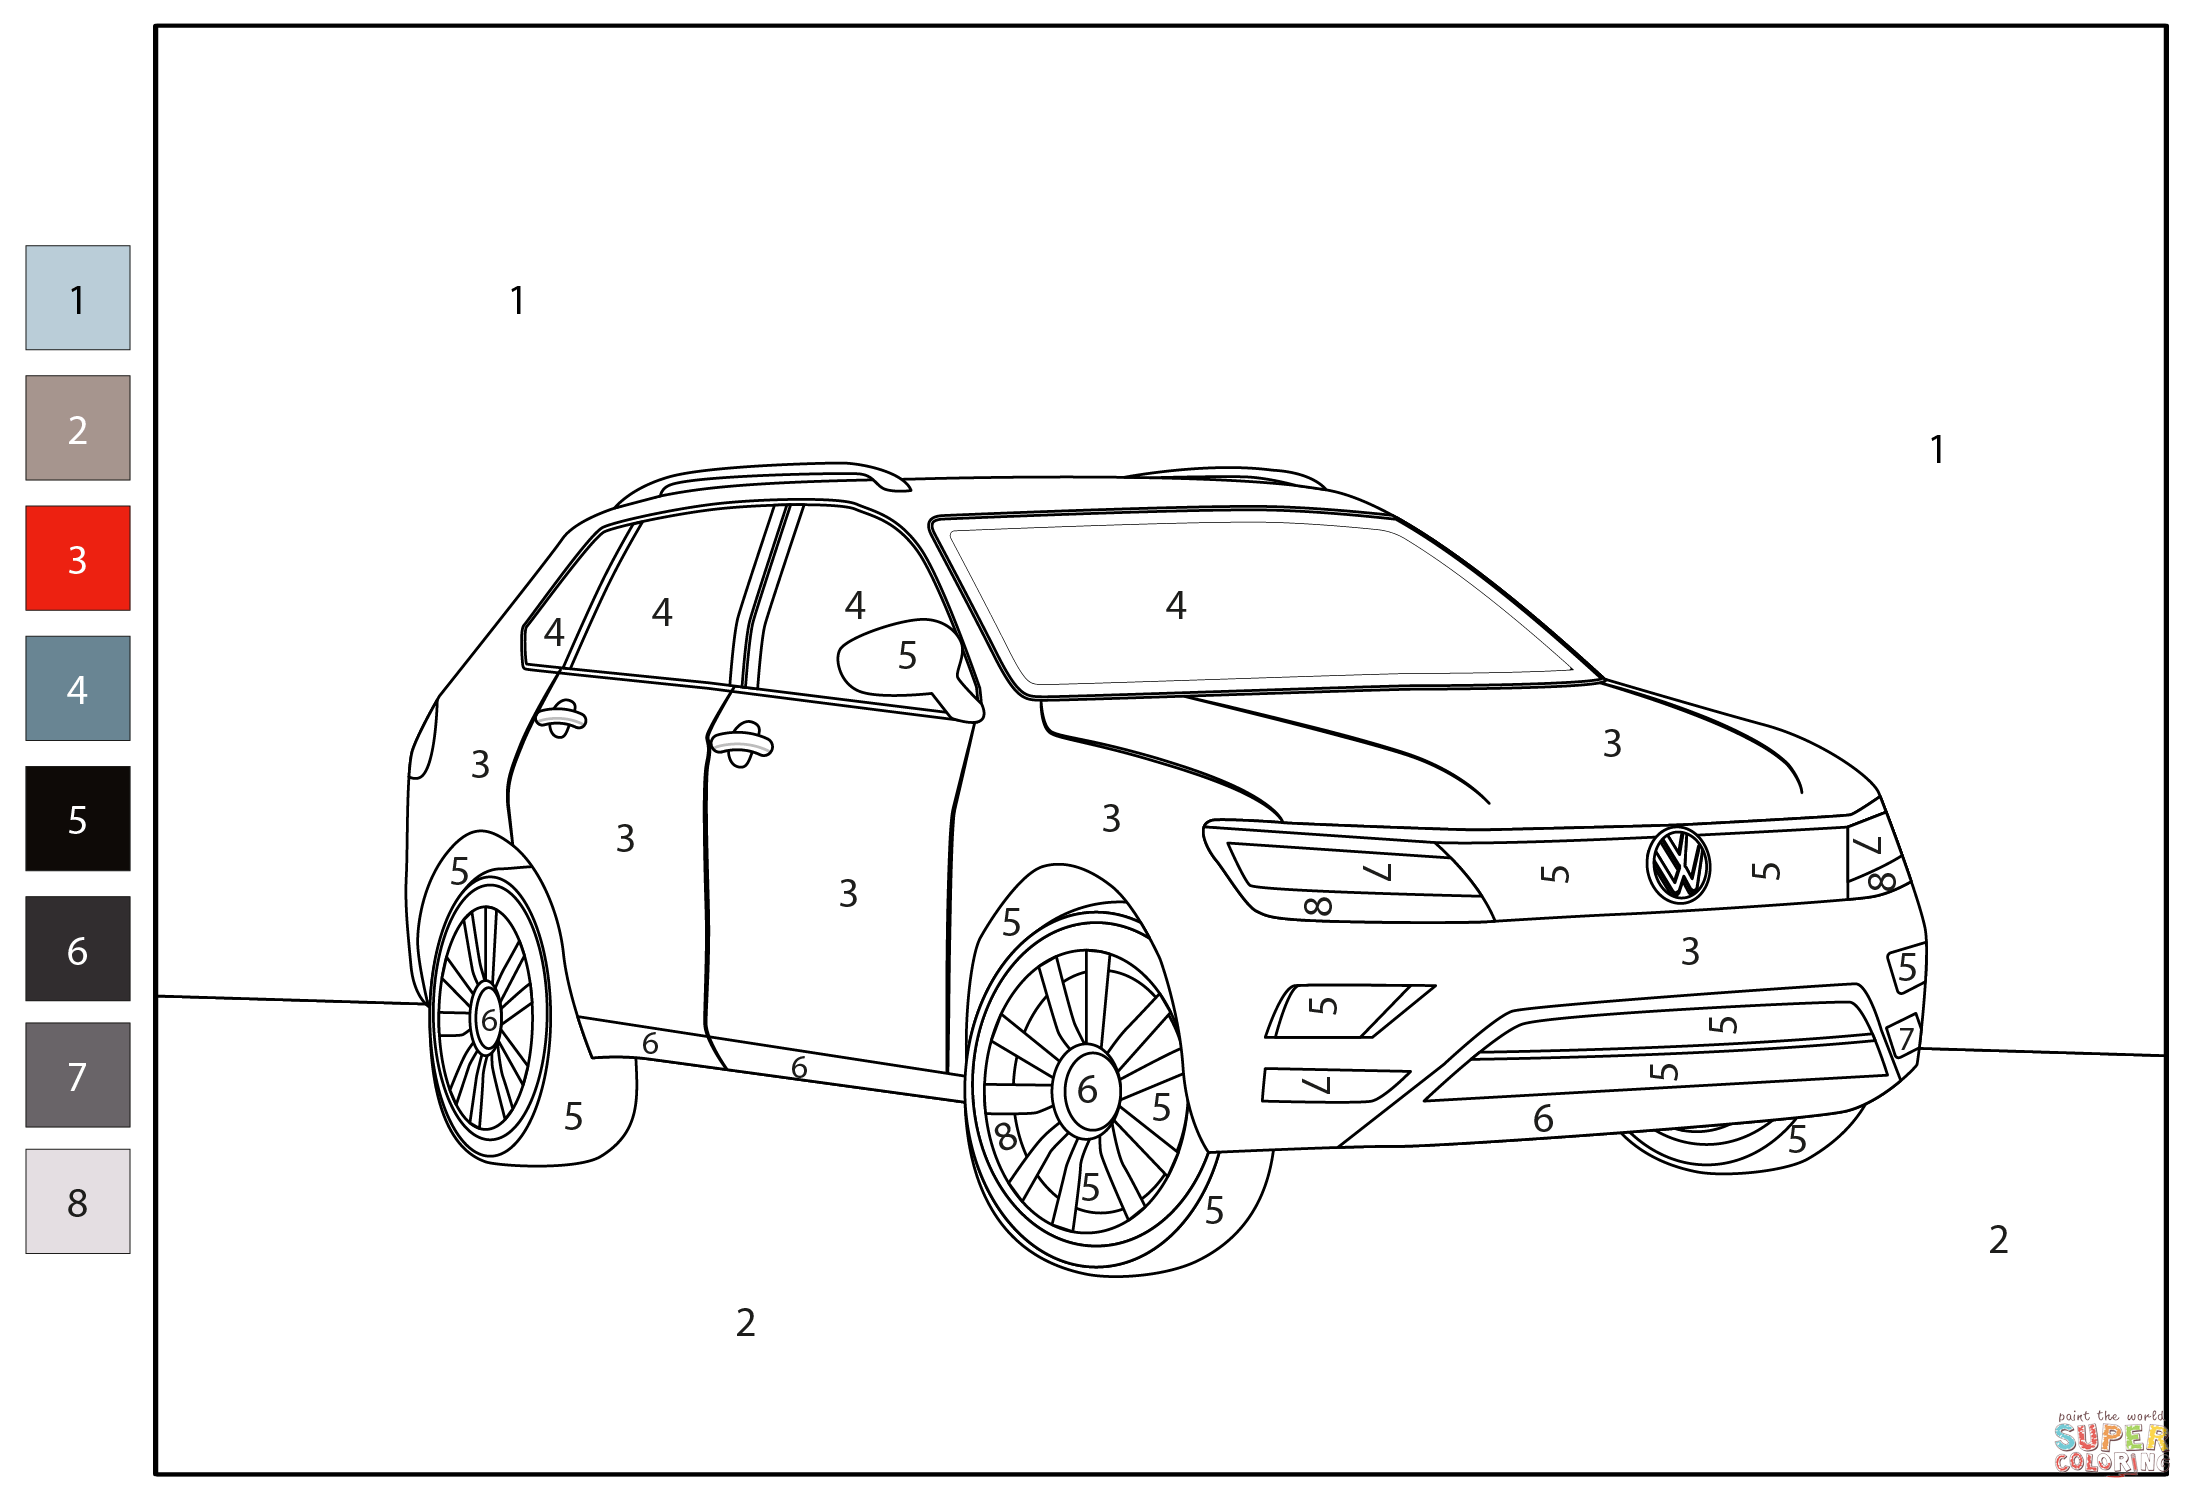 Volkswagen tiguan color by number coloring page free printable coloring pages